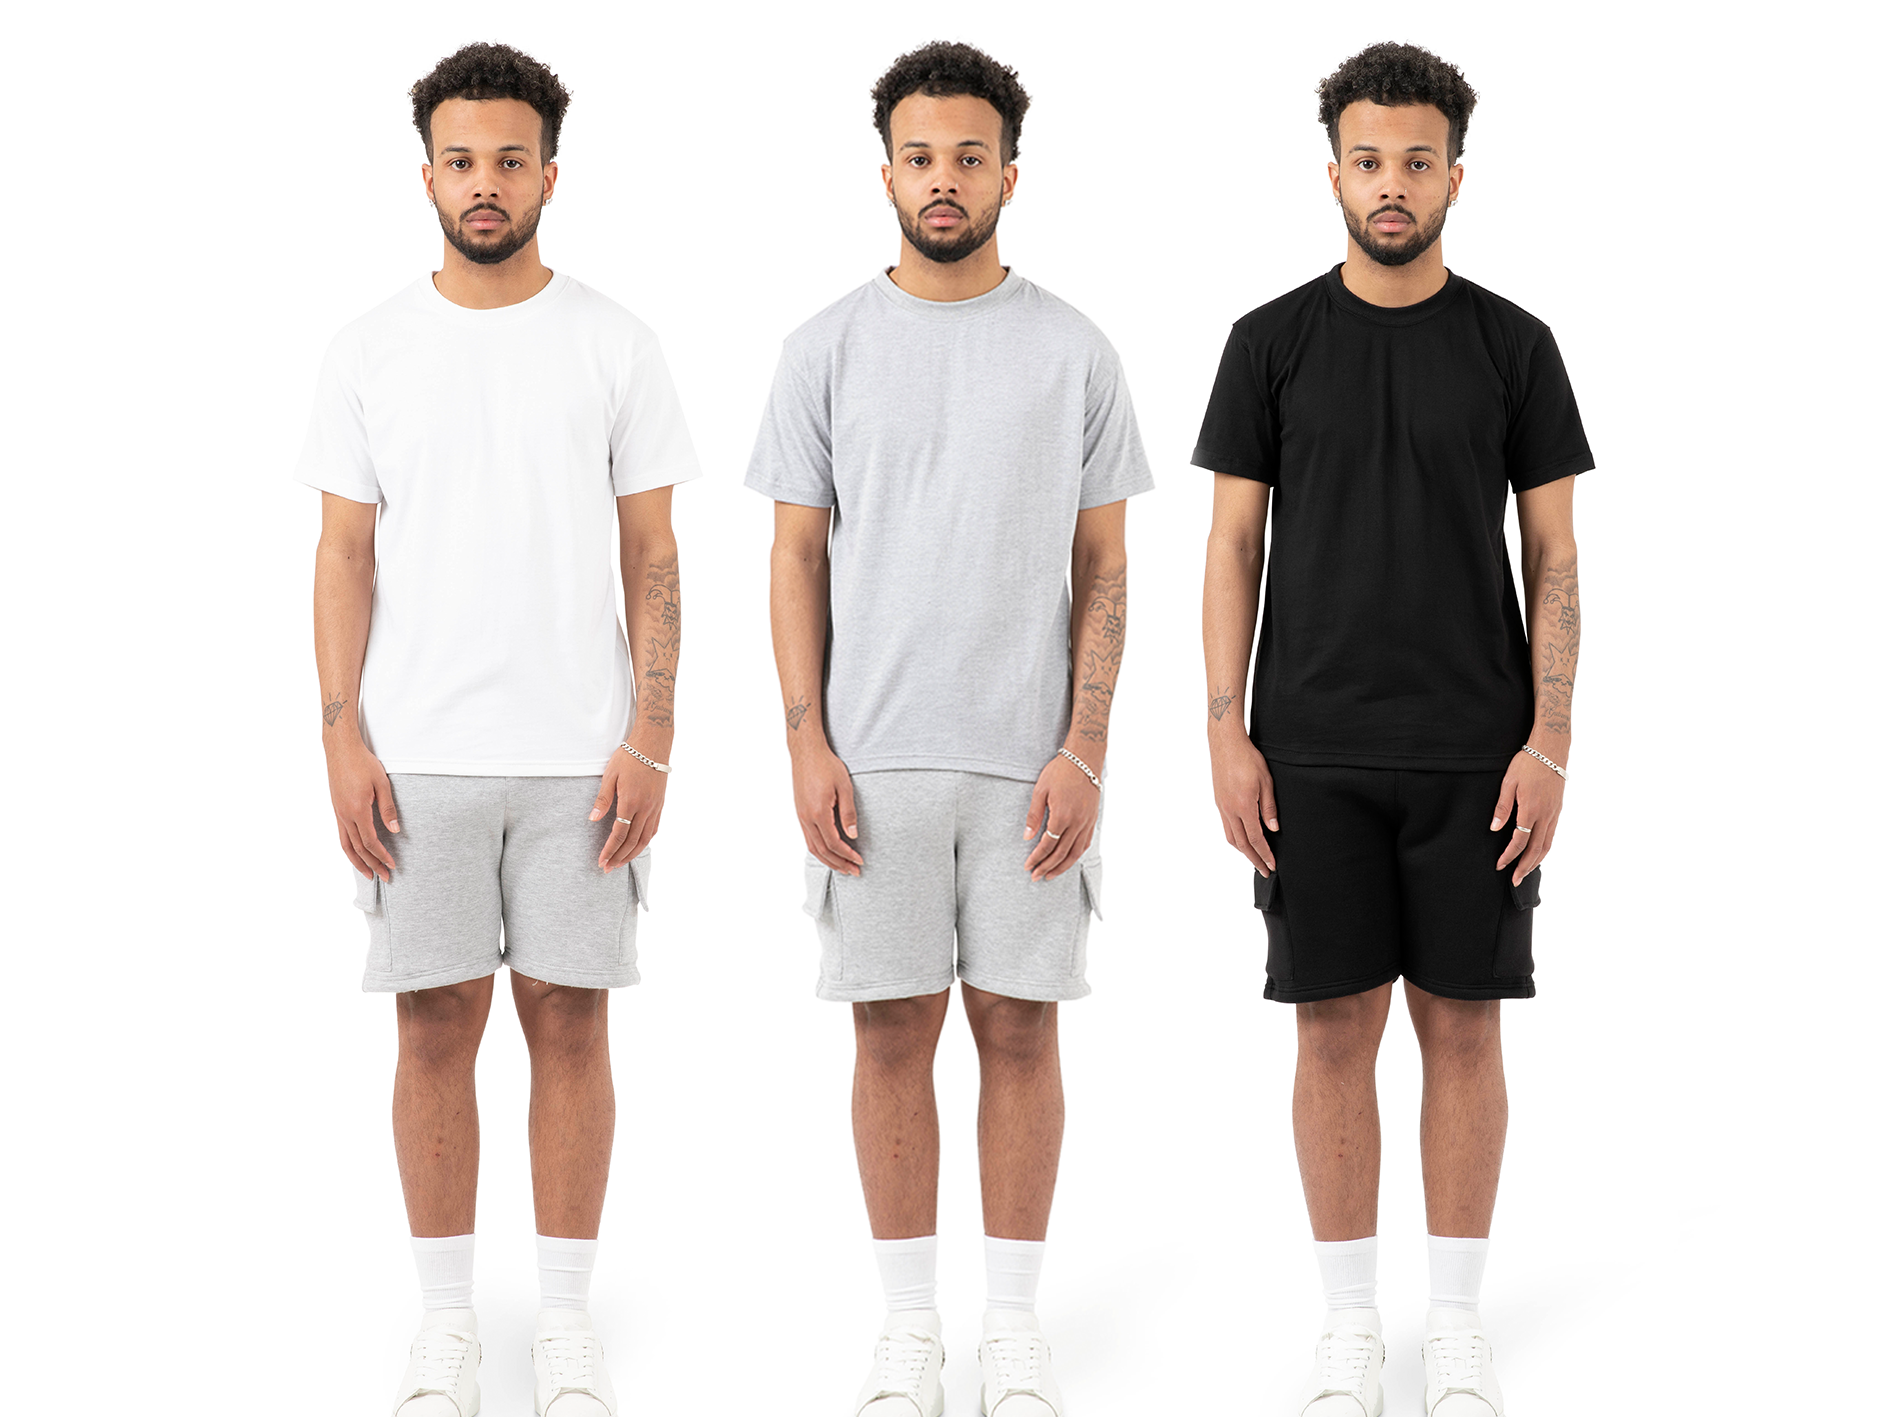 Do know different fits? Slim, regular & classic fit -